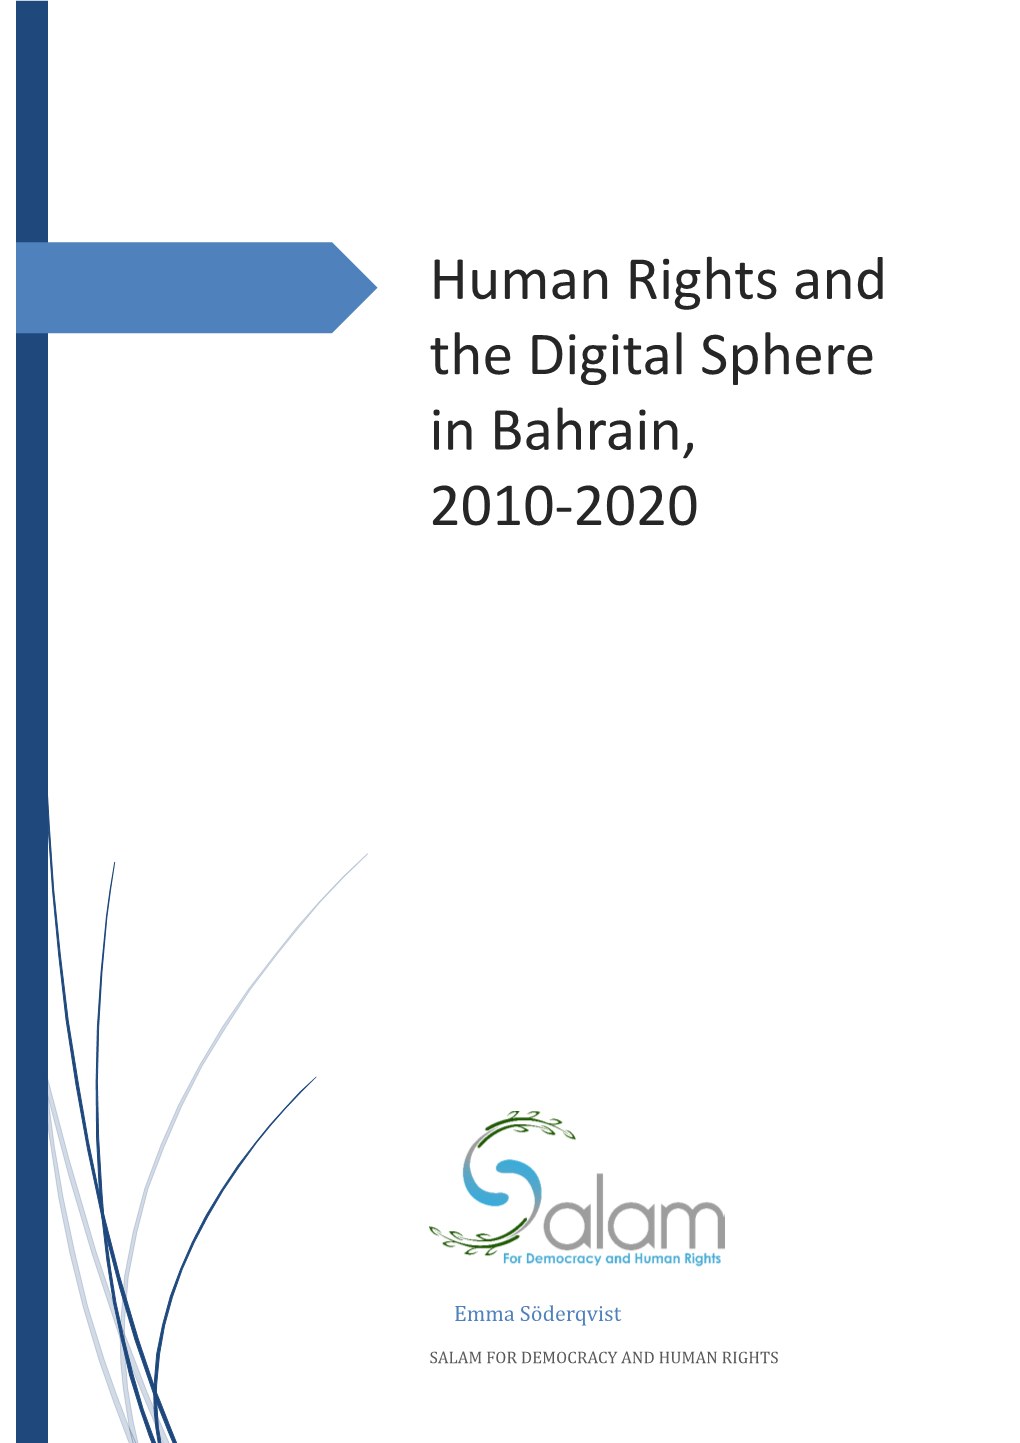 Human Rights and the Digital Sphere in Bahrain, 2010-2020